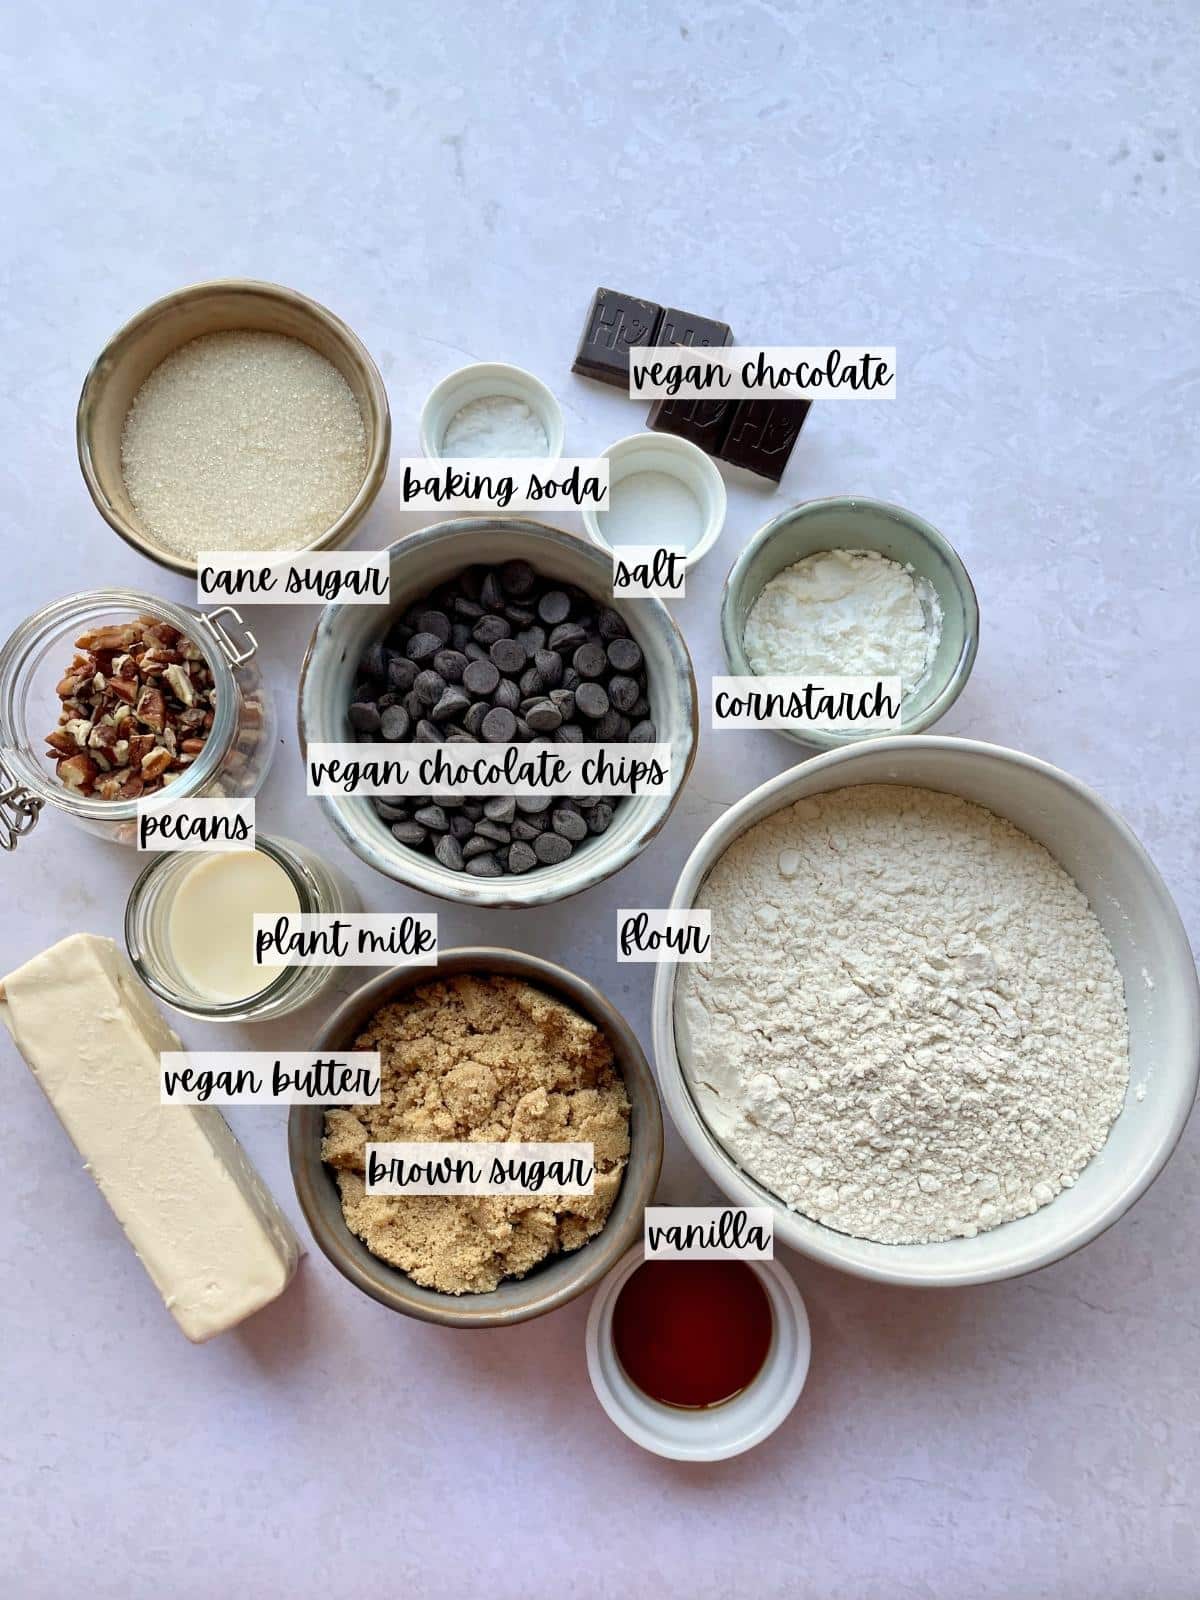 Labeled ingredients for the skillet cookie.